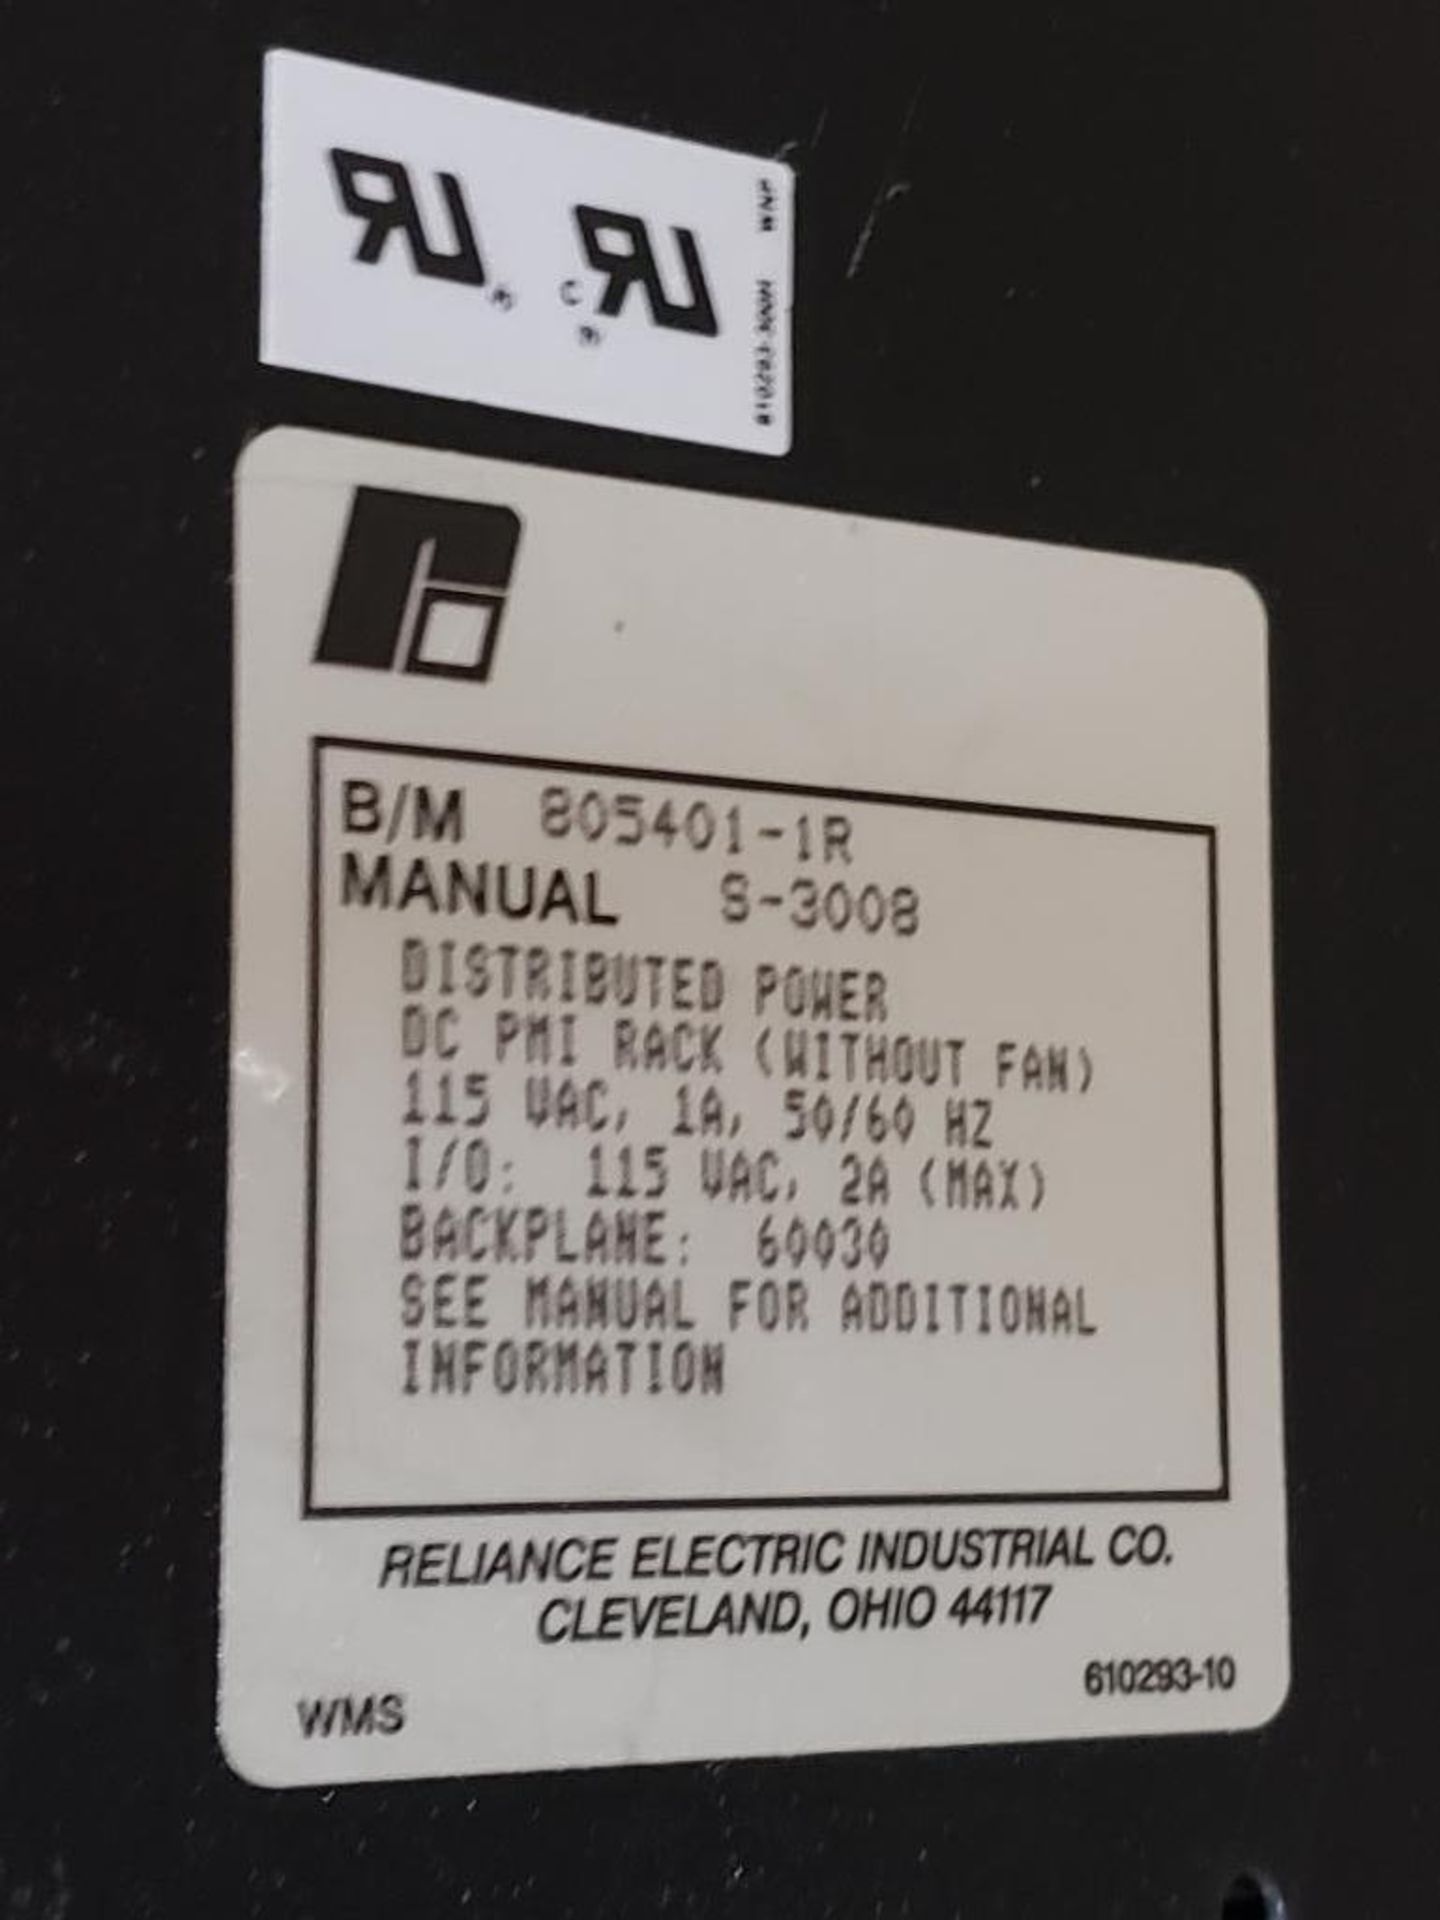 Reliance Electric Automax distributed power system SC power module. 805401-1R. S-3008. - Image 7 of 7